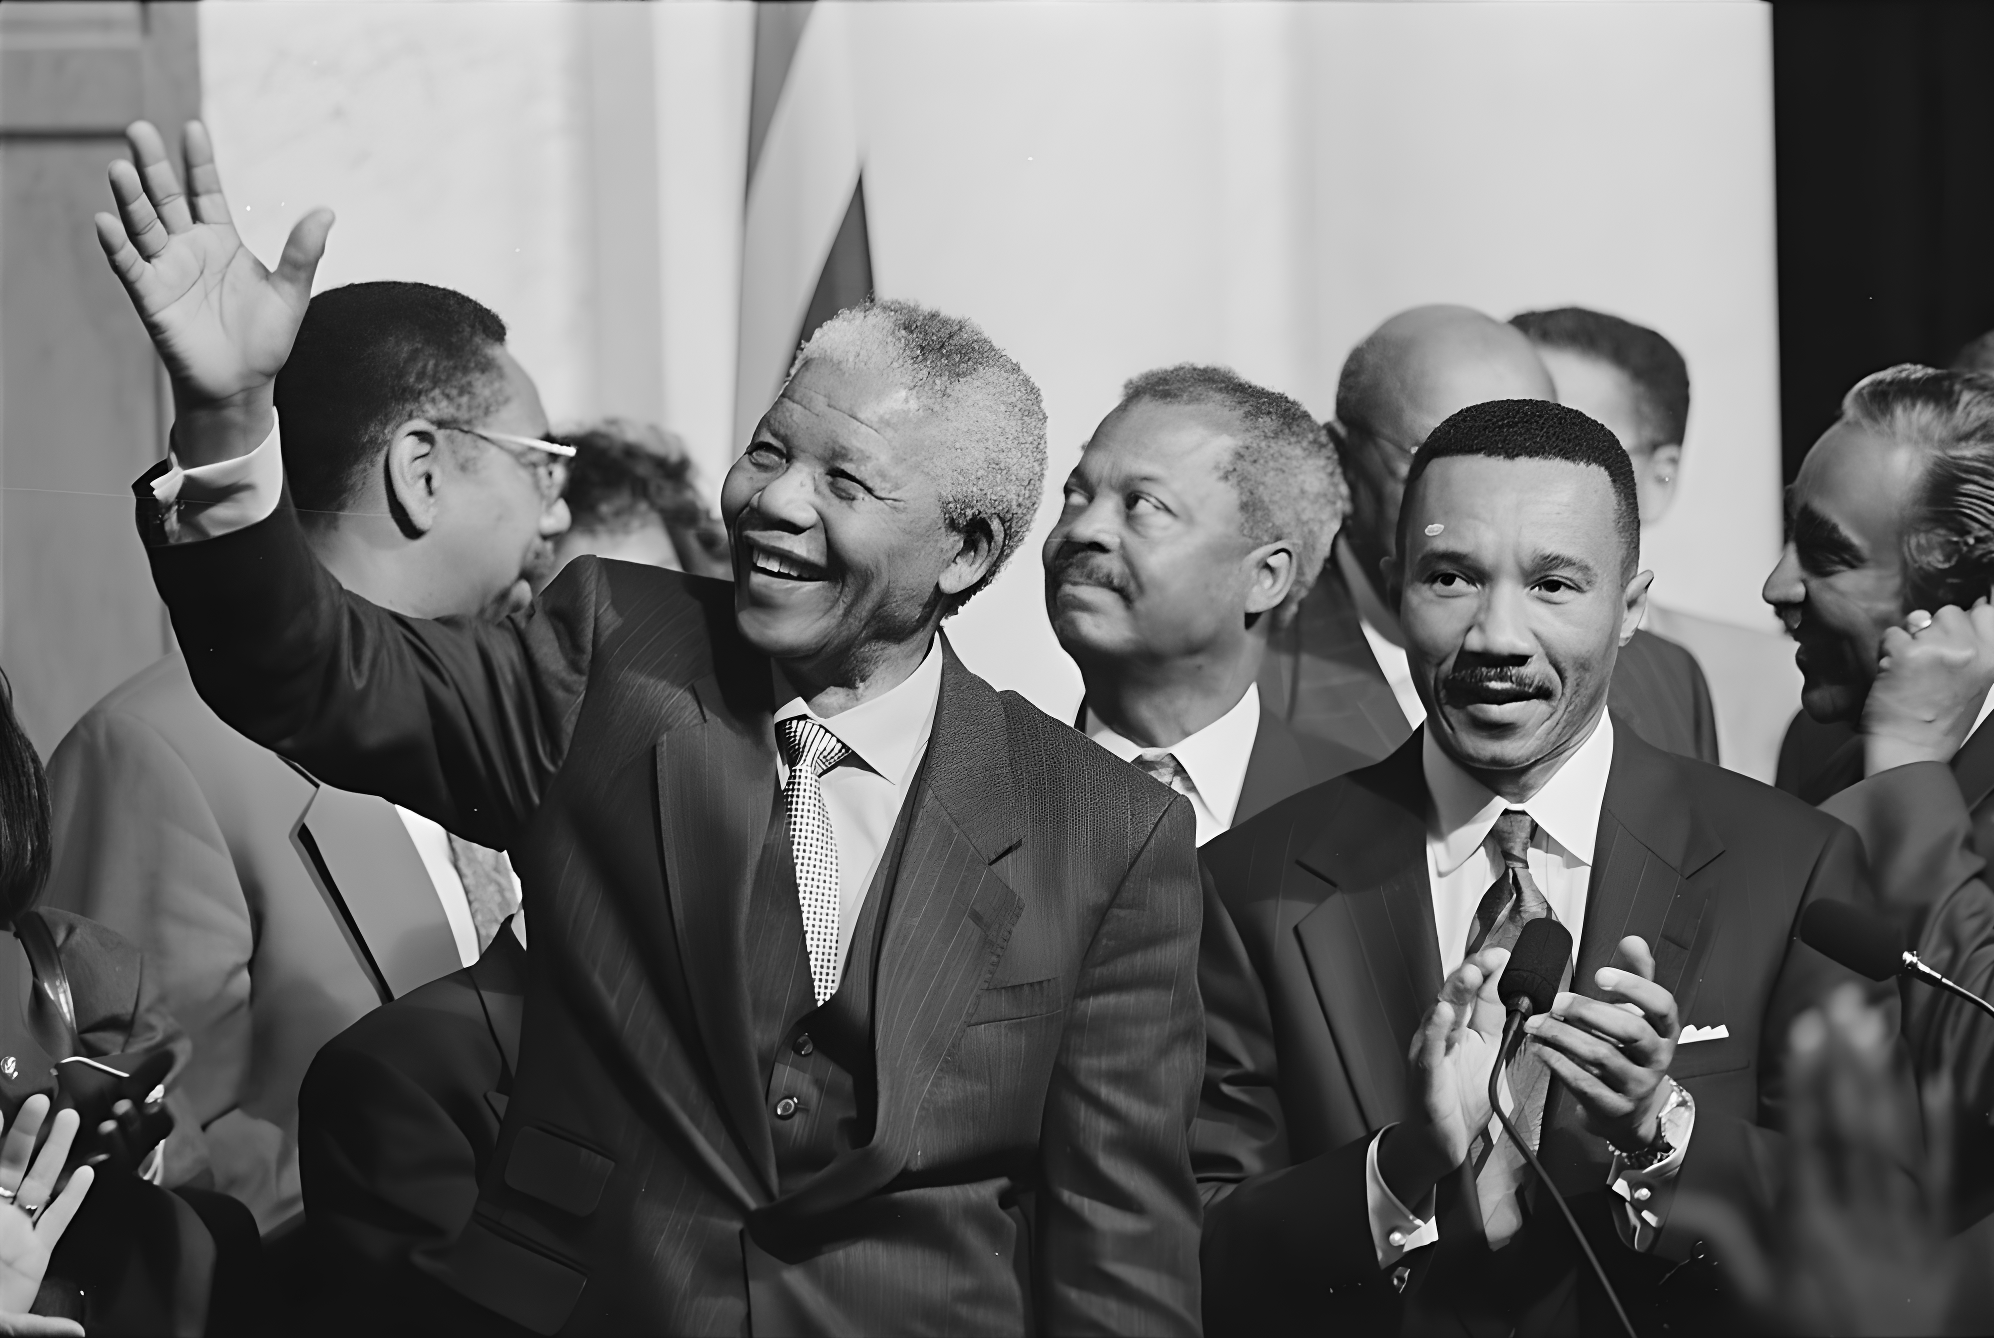 a group of people with Nelson Mandela at front standing on the stage indicating great leadership.